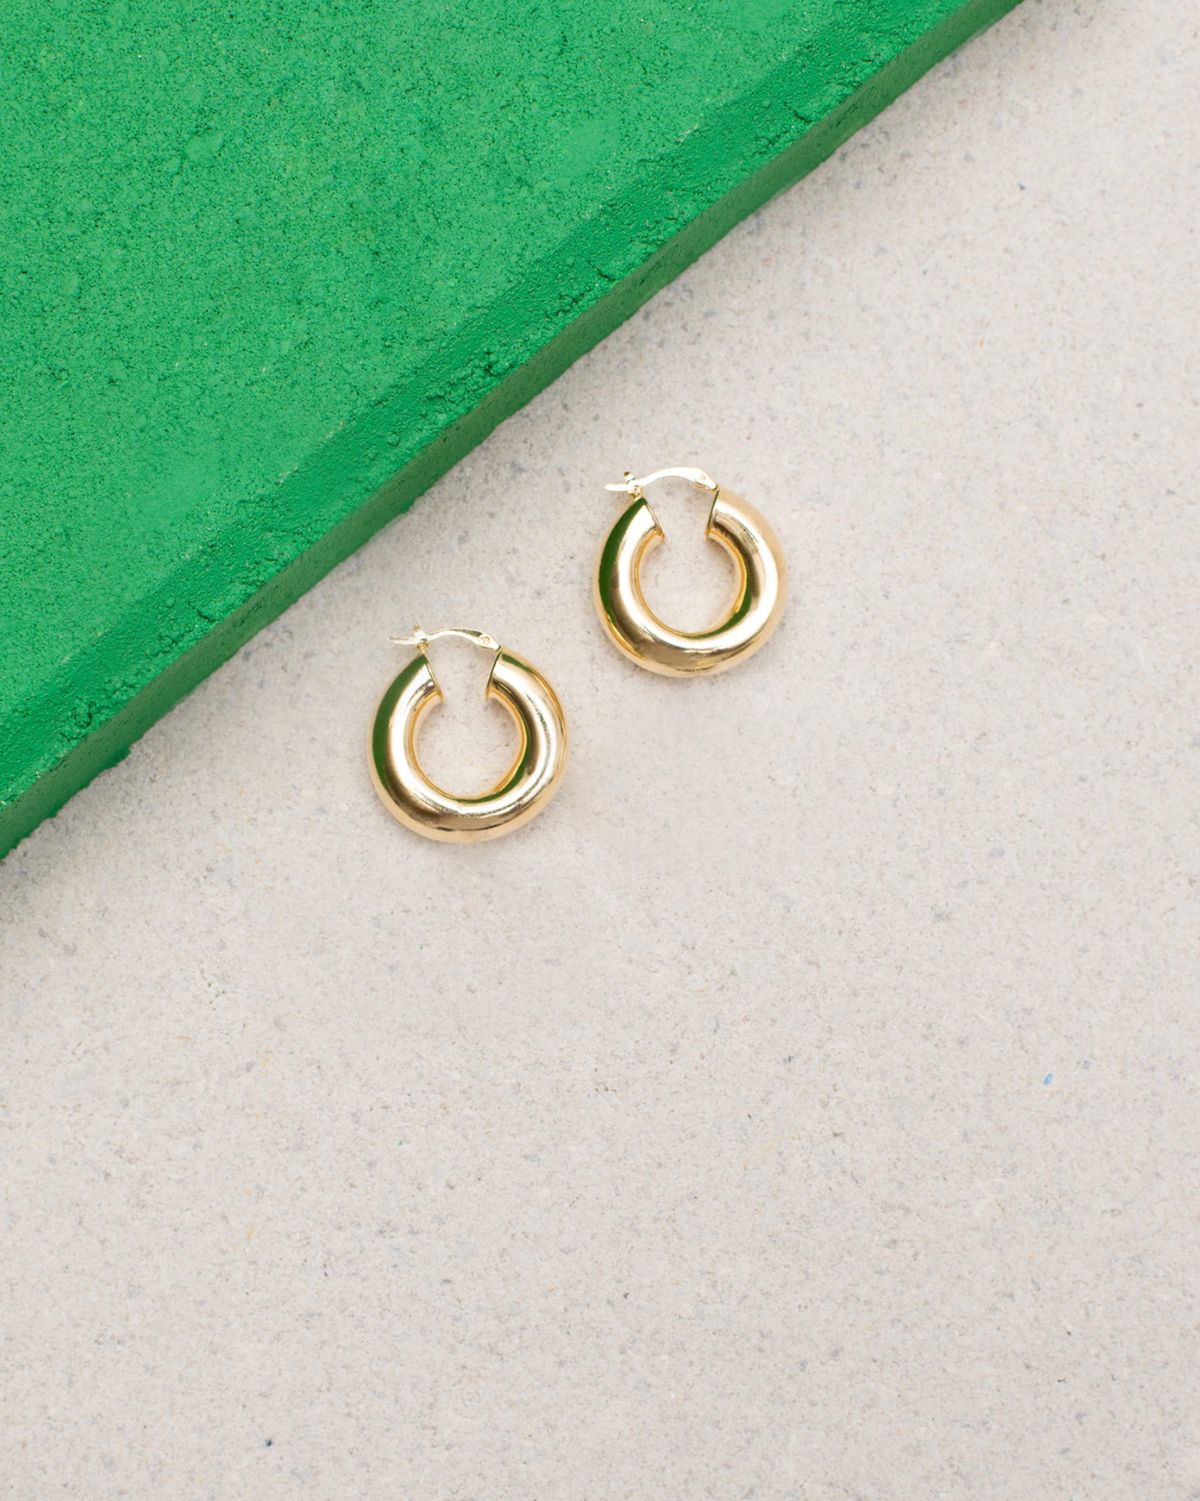 14k Gold filled and 14k Rose Gold filled Simple minimal Gifts for her Minimalist style Horseshoe earrings in Sterling Silver